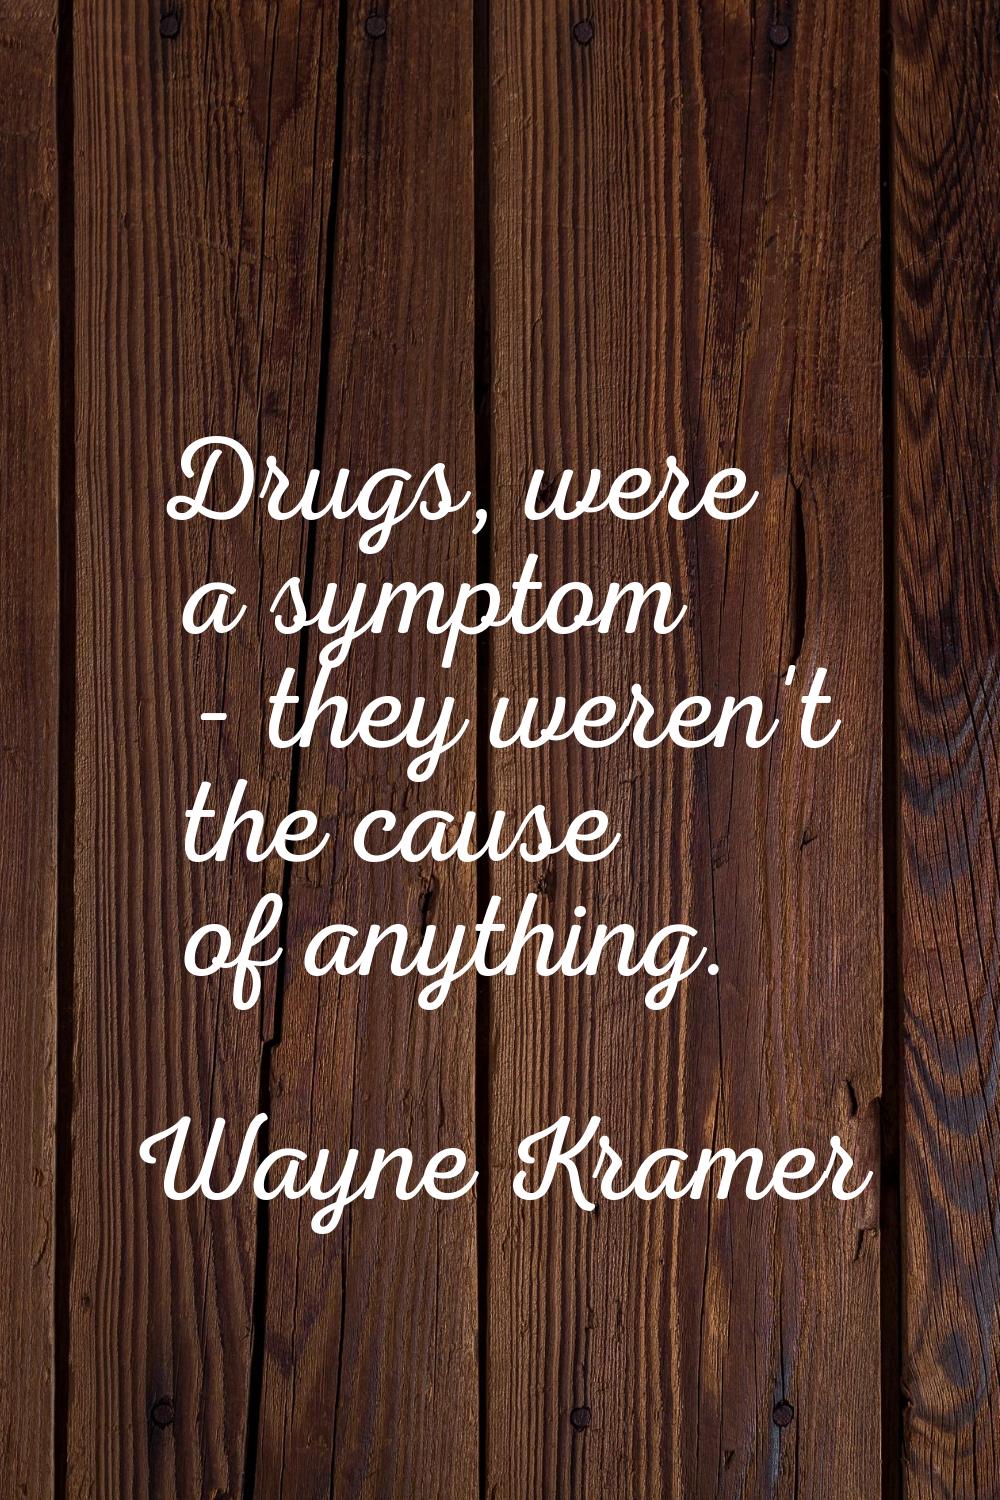 Drugs, were a symptom - they weren't the cause of anything.